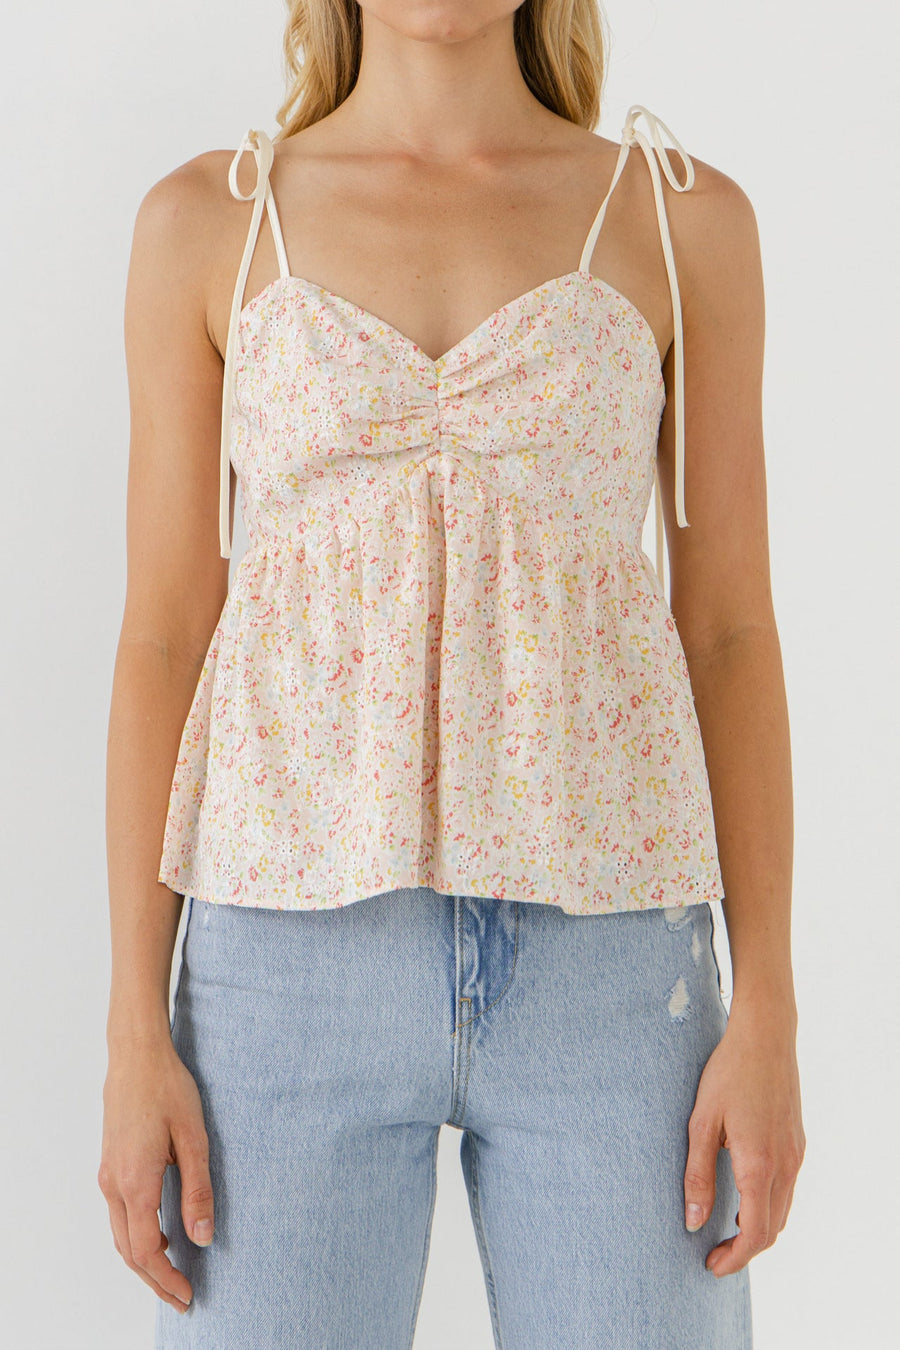 FREE THE ROSES-Straps with Floral Top-TOPS available at Objectrare